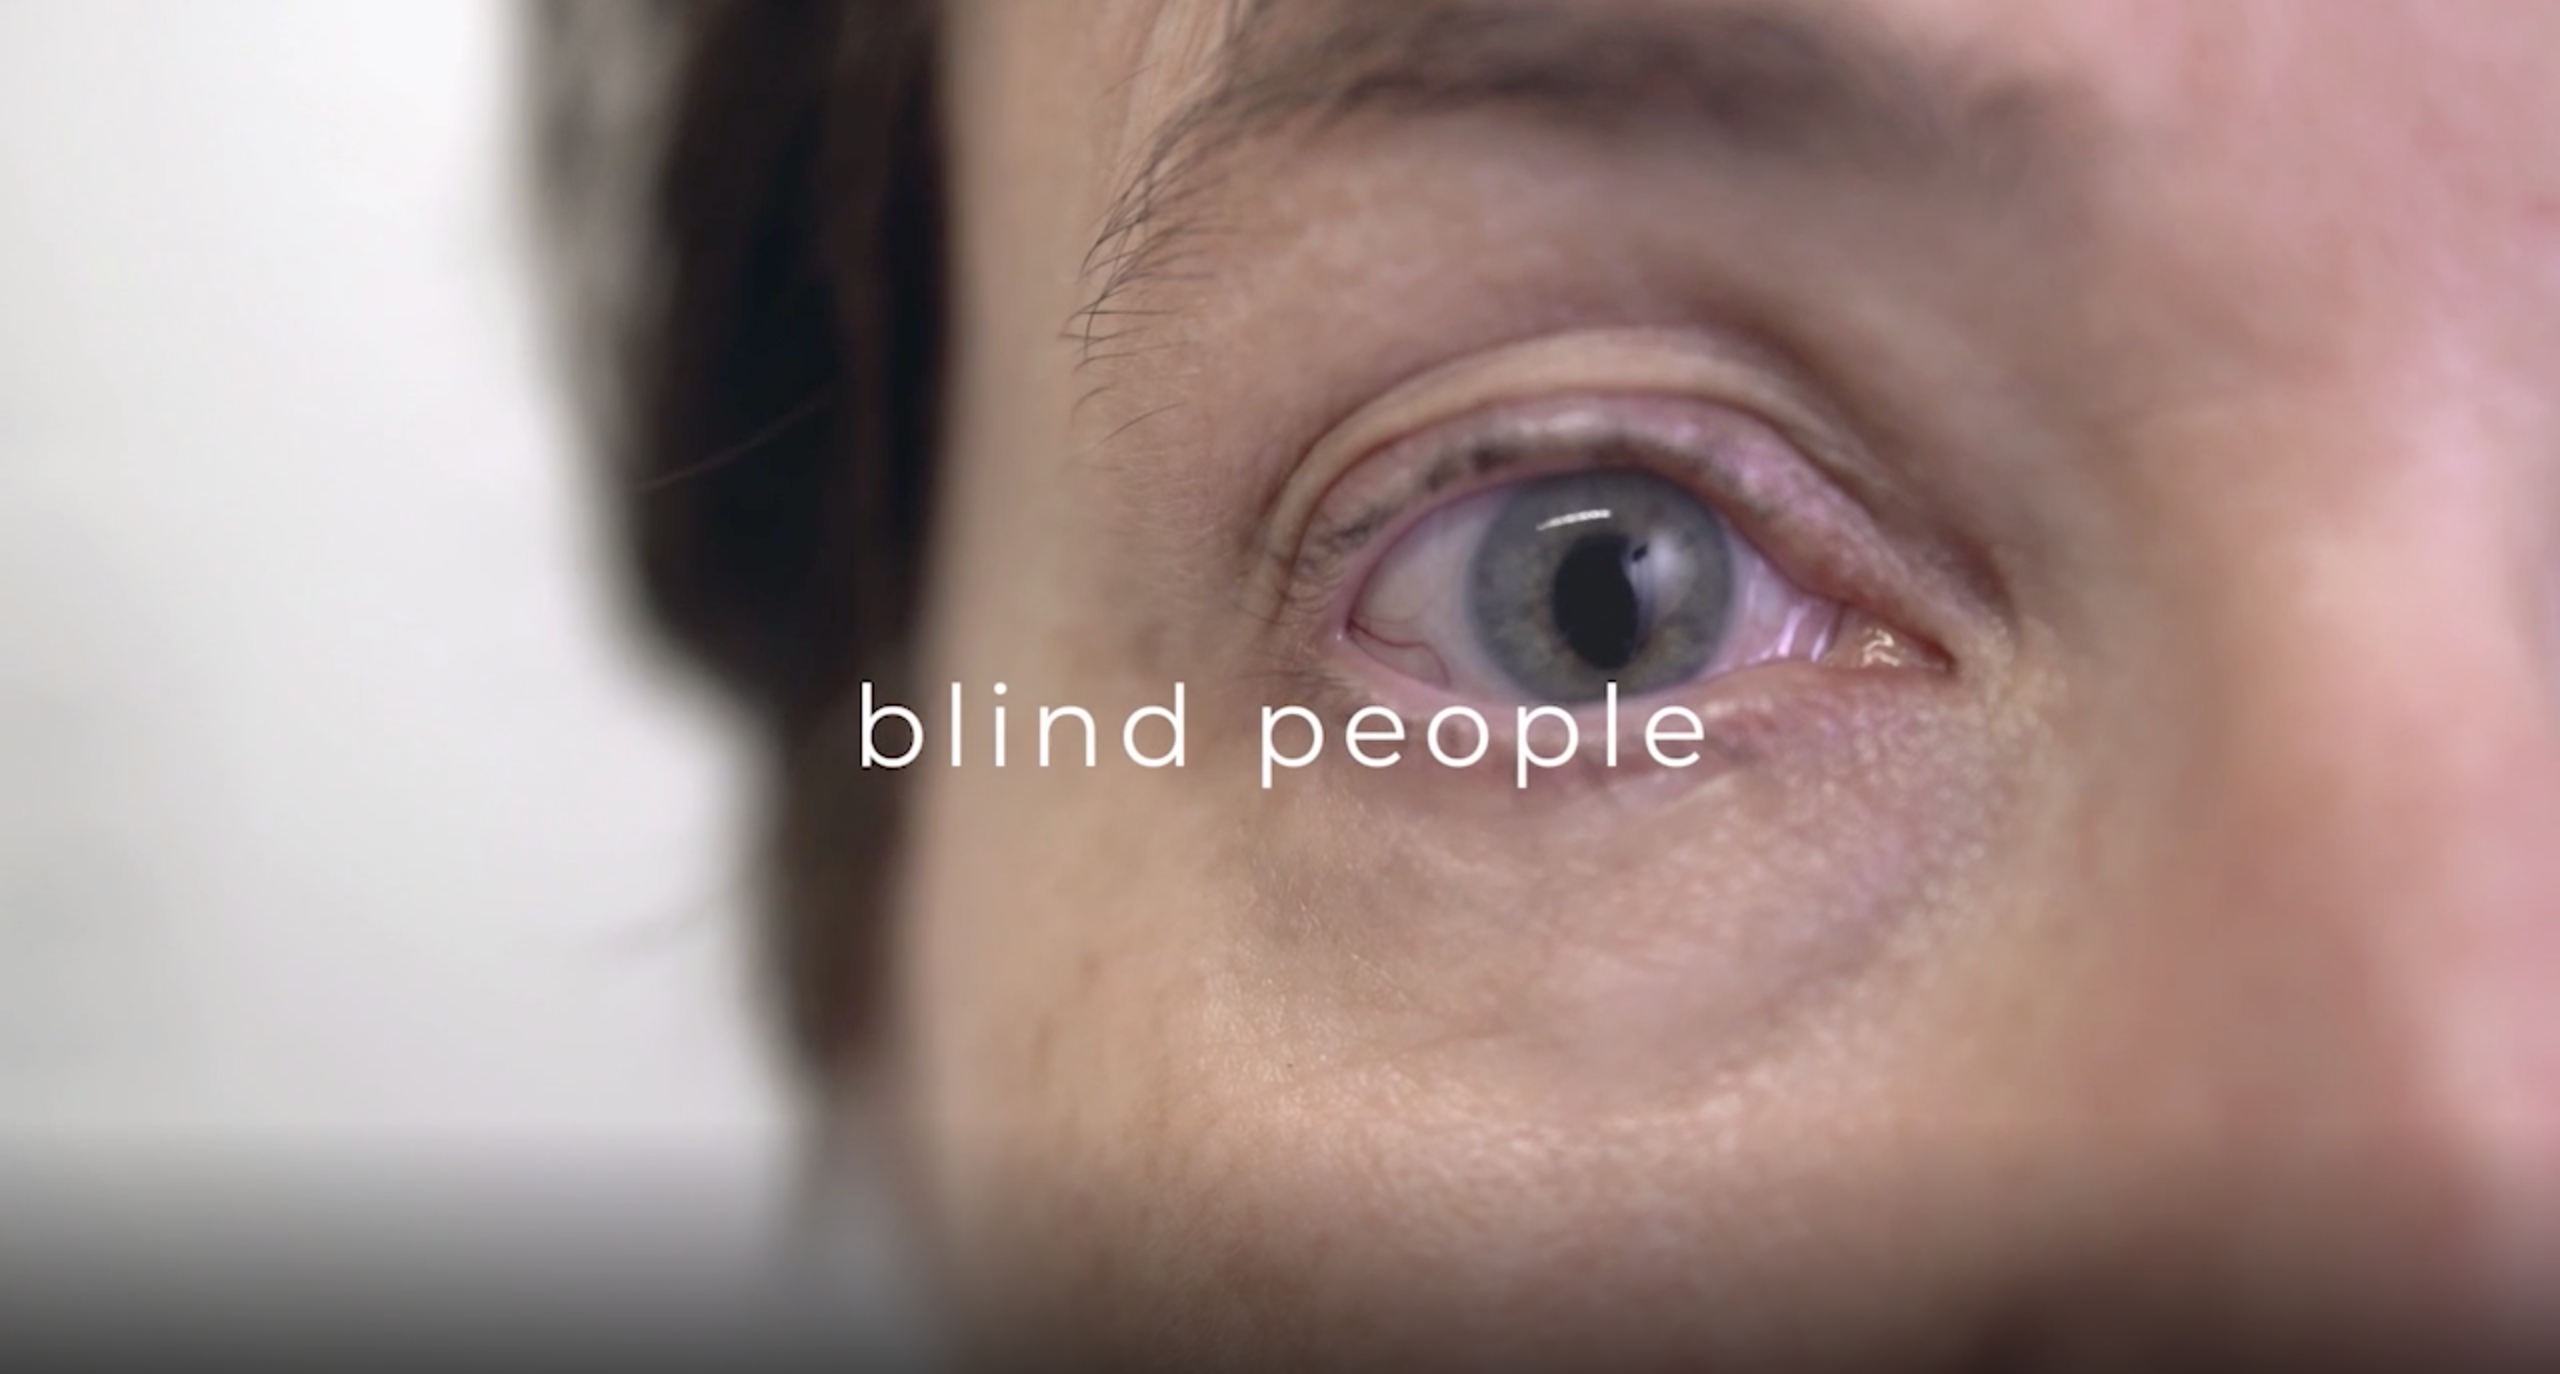 Extreme Close Up of a clouded blind eye - text on the screen reads 'blind people'